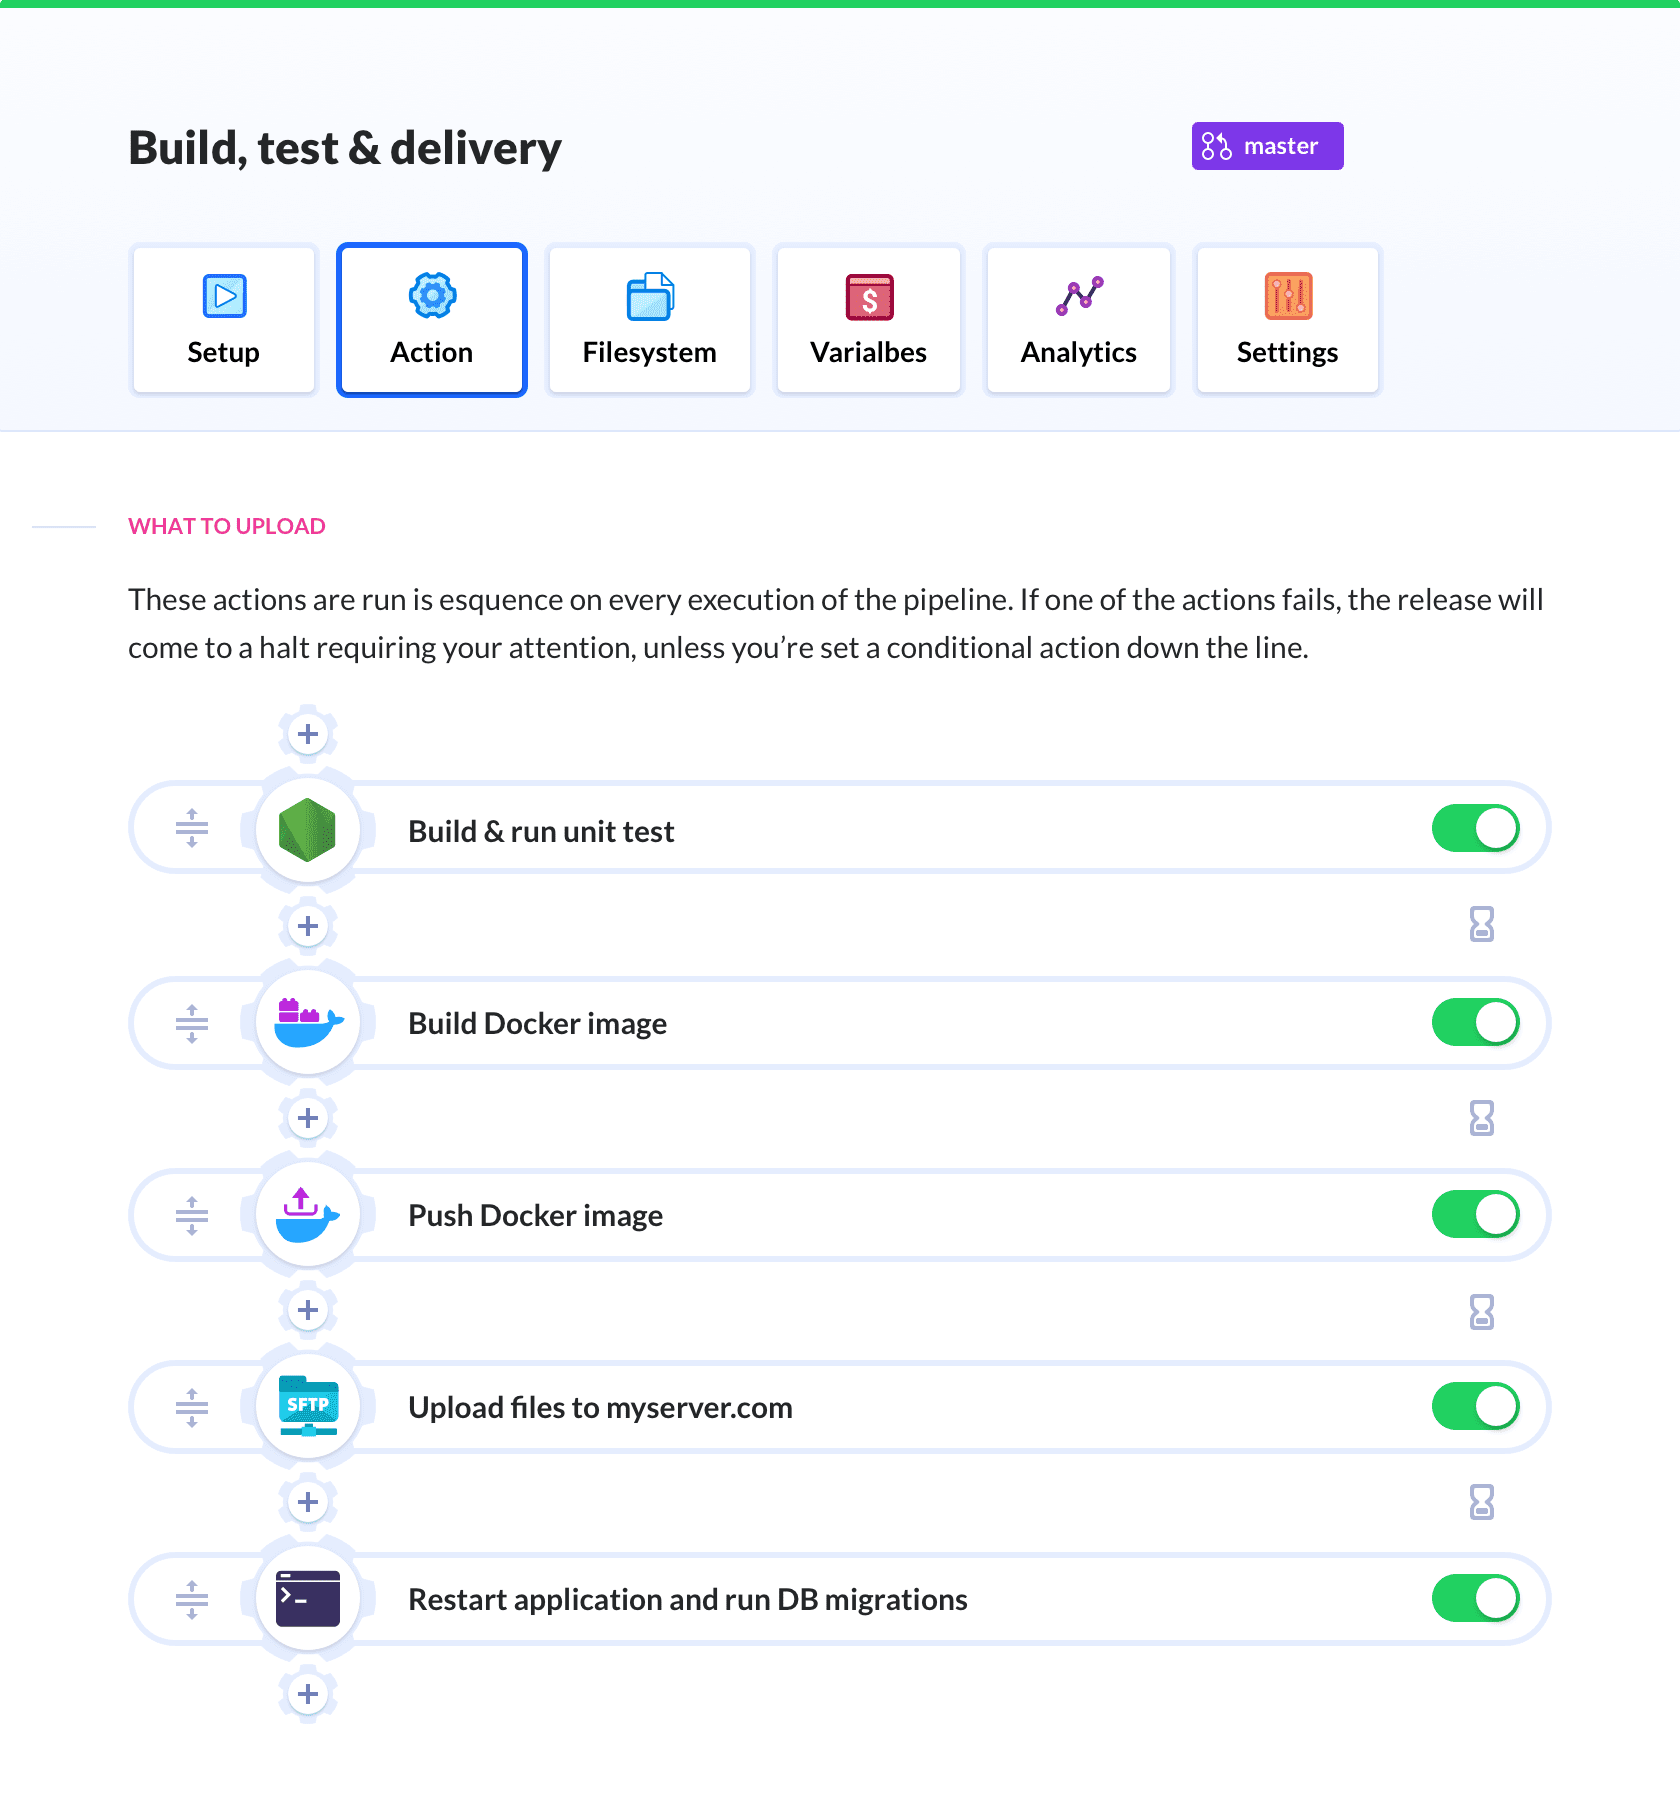 Screenshot of build, test & delivery process in Buddy